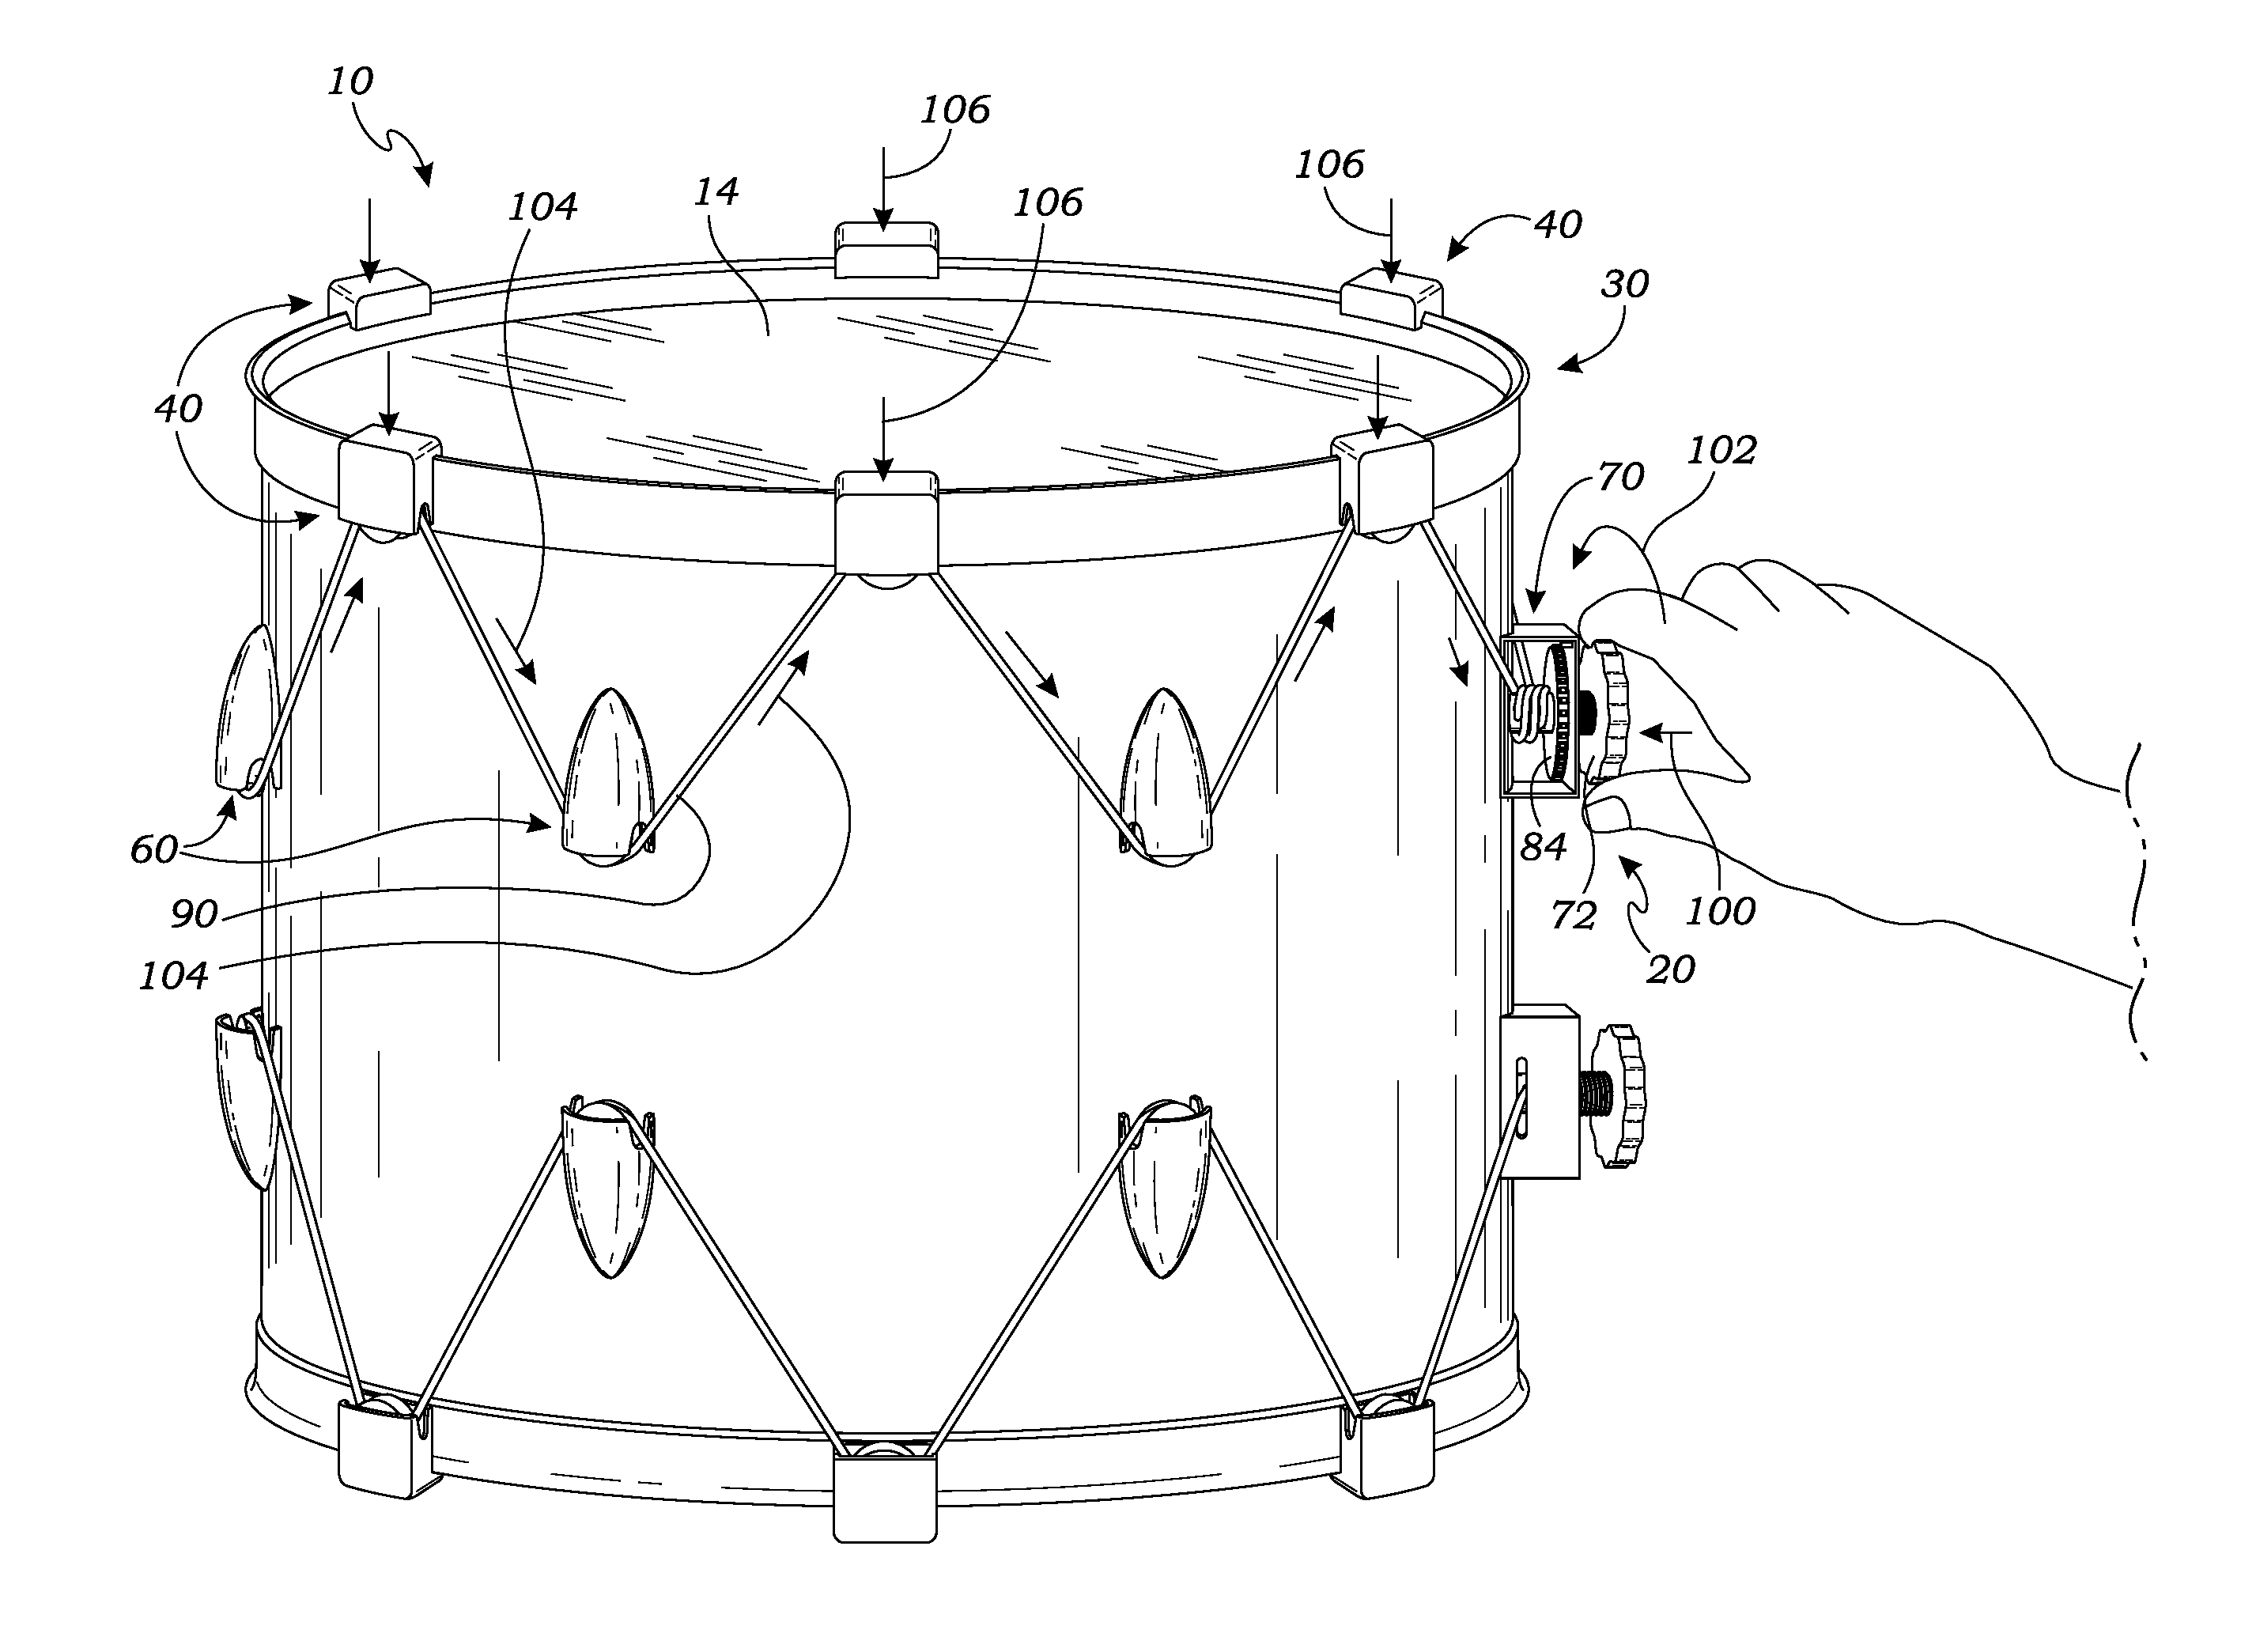 Drumhead tuning rim apparatus and method of use